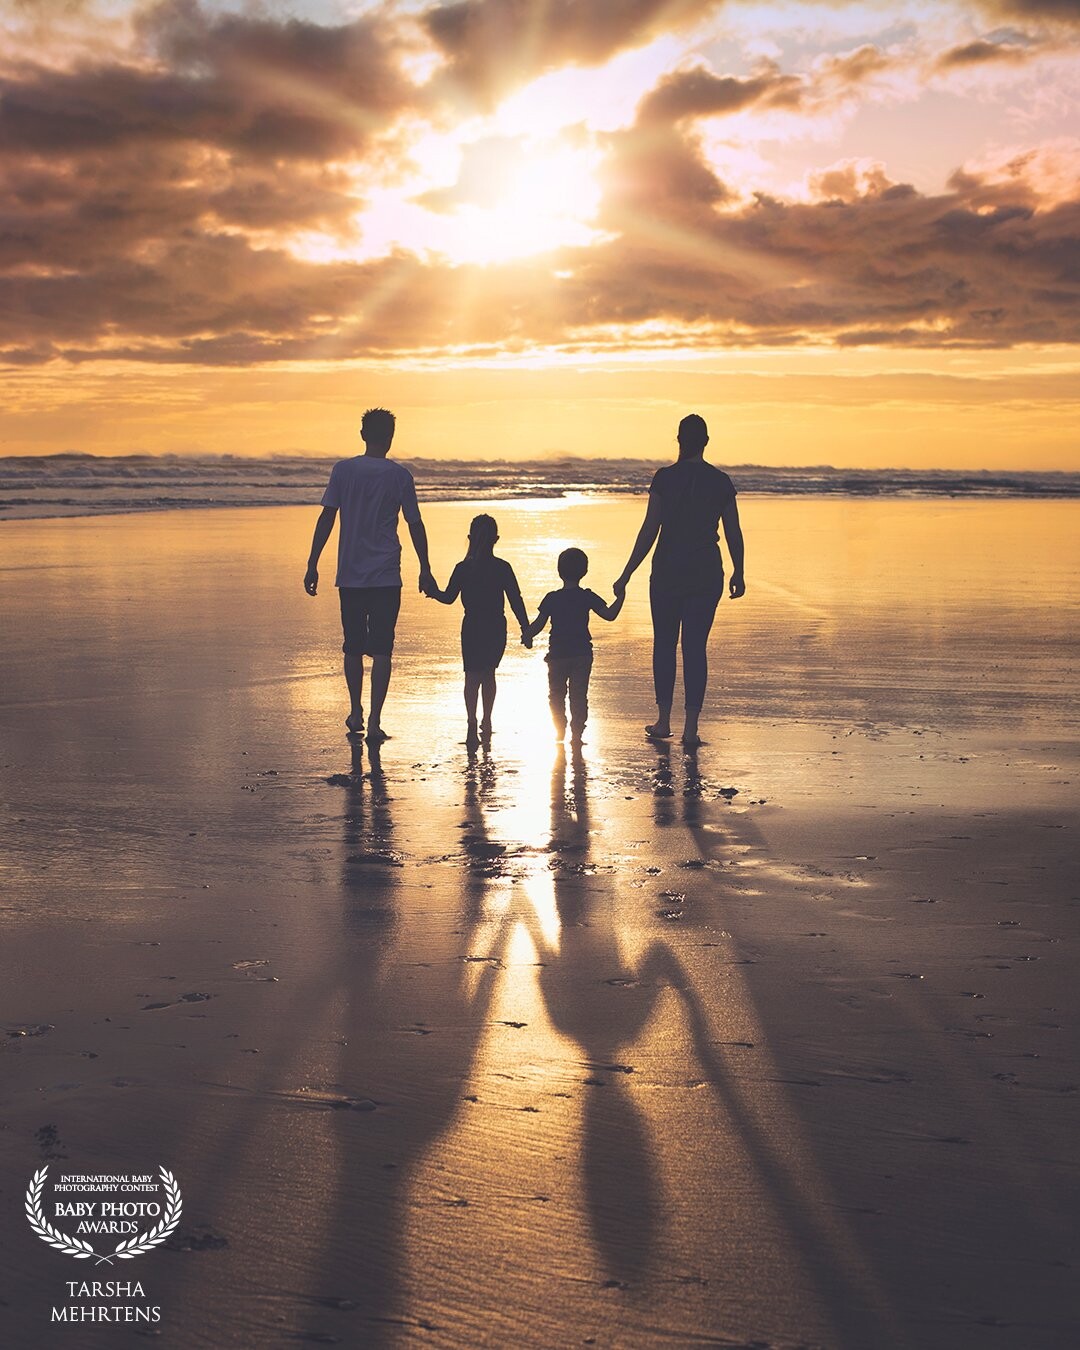 The perfect sunset for this family at Kariotahi Beach, NZ. The best way to end a day, creating memories.